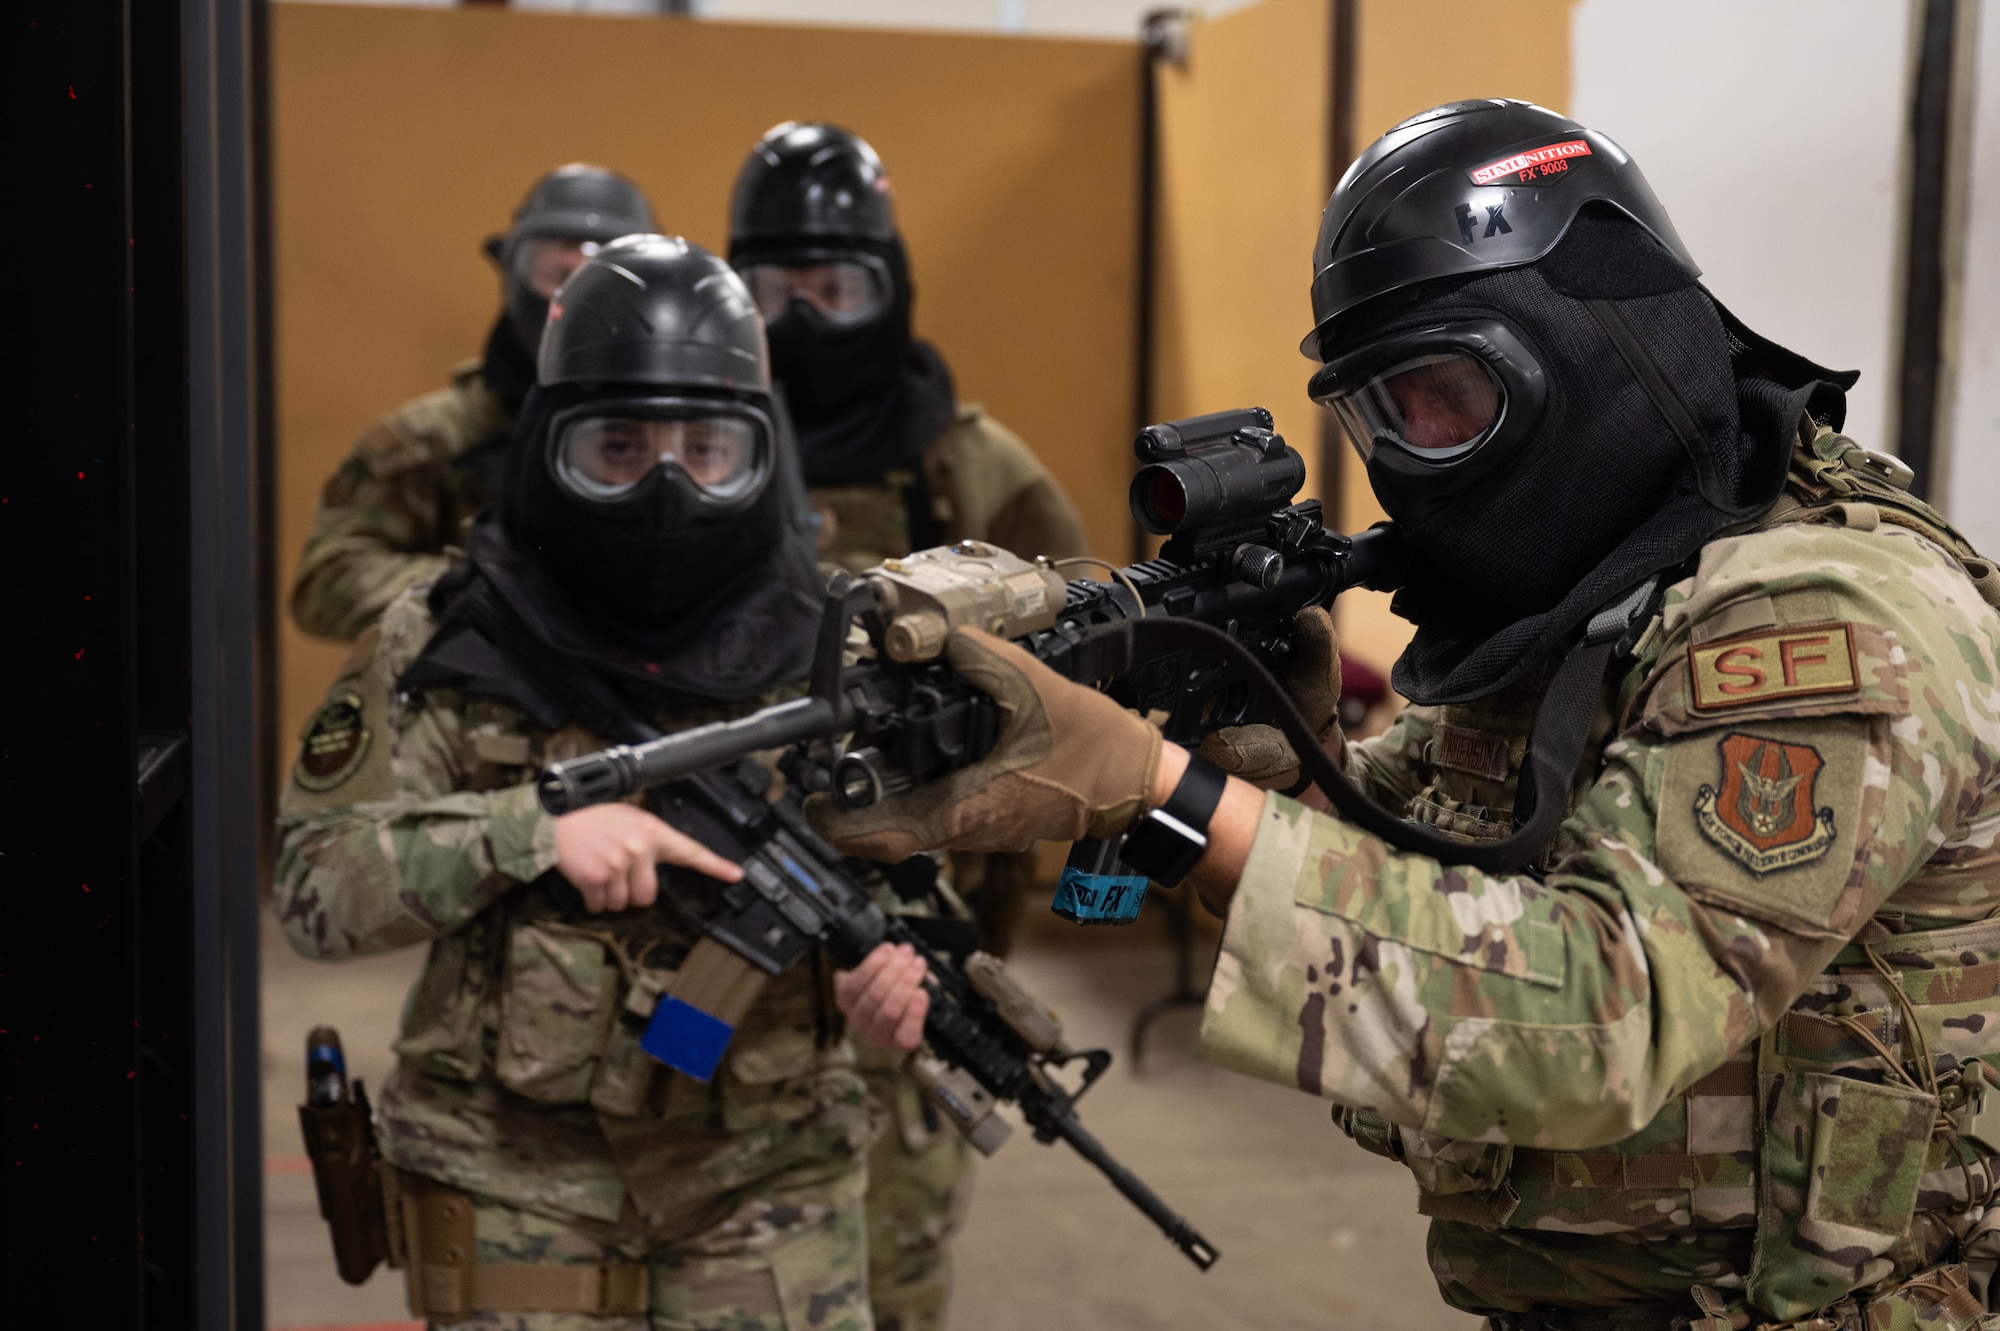 310th and 710th Security Forces learn threat elimination tactics from local SWAT, former Army Ranger